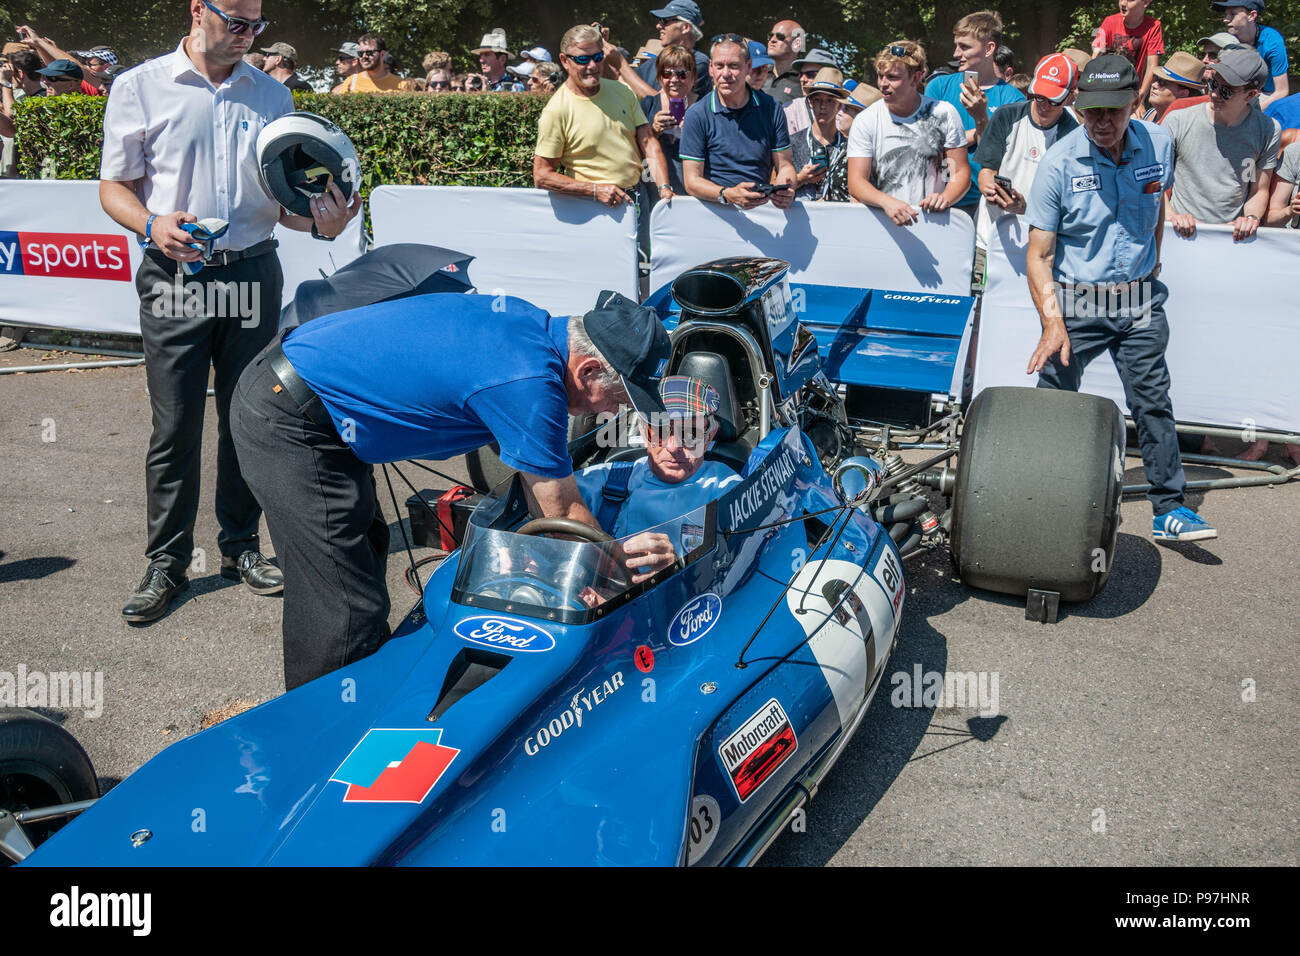 Goodwood Festival of Speed, West Sussex, UK. 15th July 2018. Celebrating 25 years, Silver Jubilee. Jackie Stewart former British Formula One racing legend, preparing to race.. © Gillian Downes/AlamyLive News Stock Photo